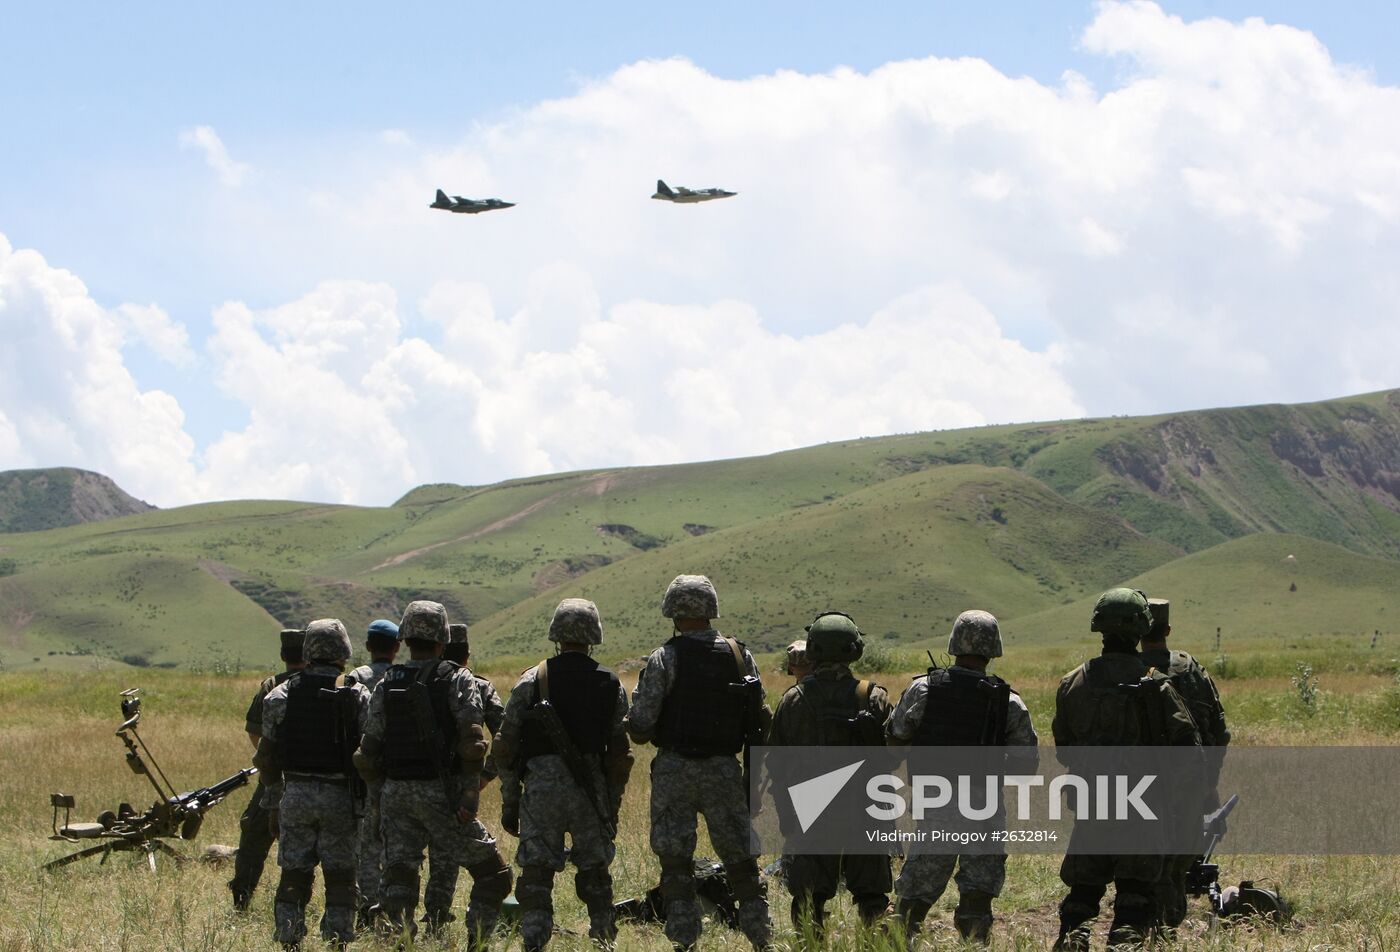 Joint exercises by Russian Airborne Forces and Kyrgyz National Guards